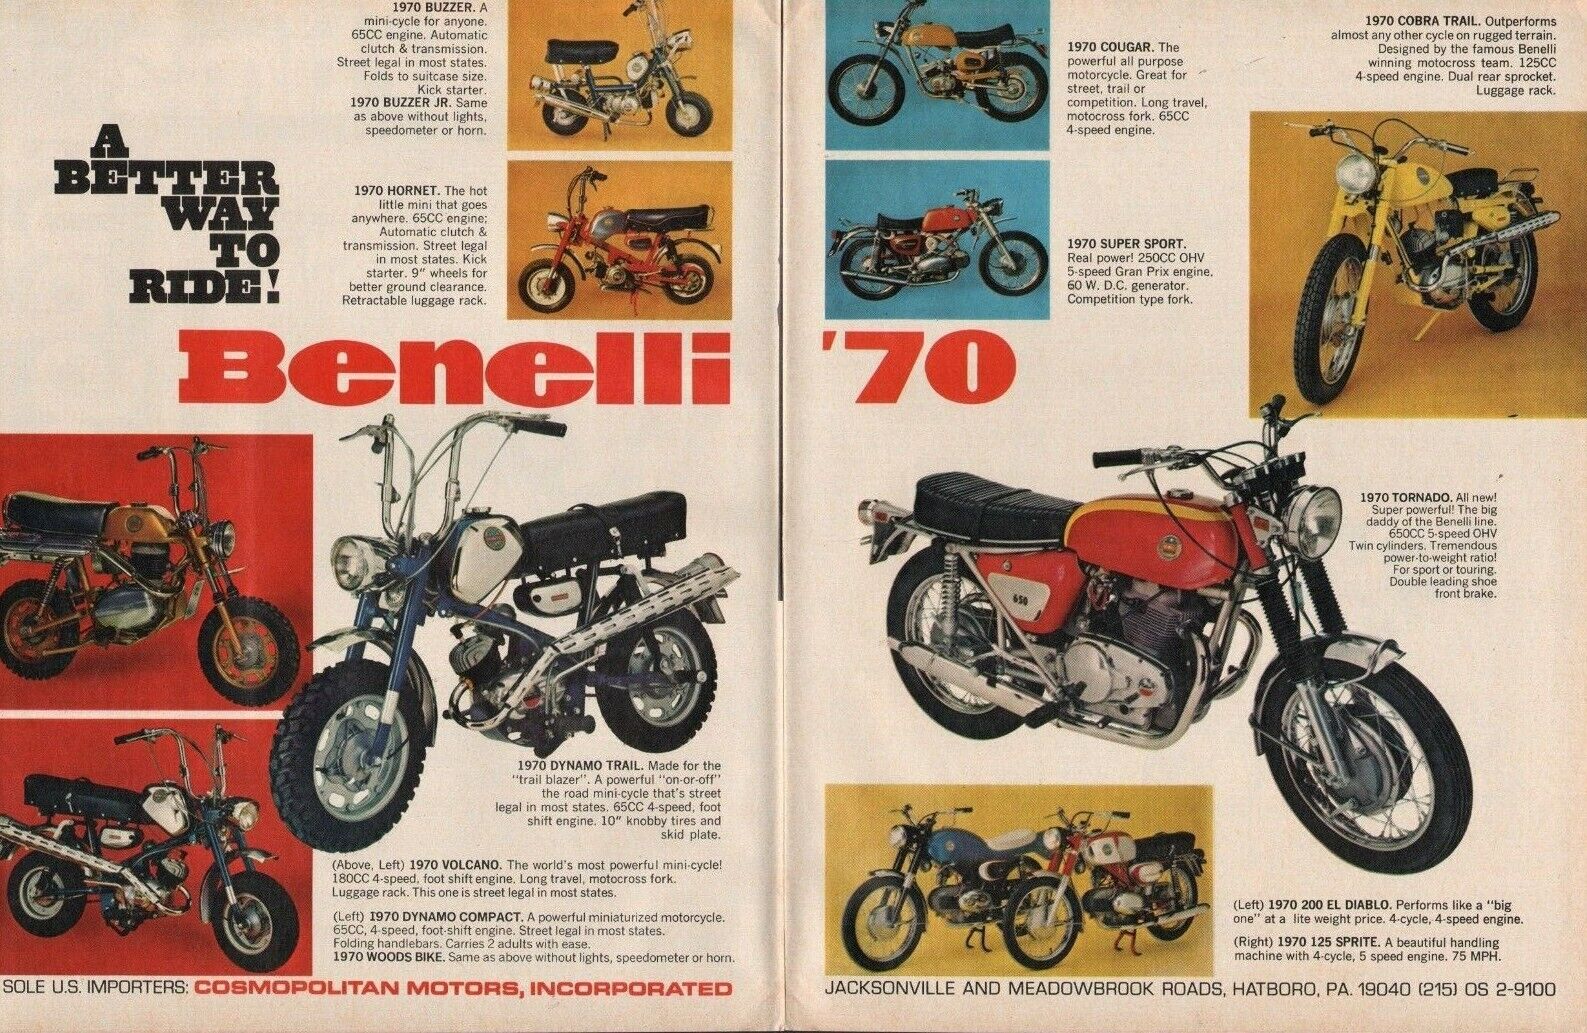 1970 Benelli Minibikes Mini-Cycles & Motorcycles - 2-Page Vintage Motorcycle Ad 